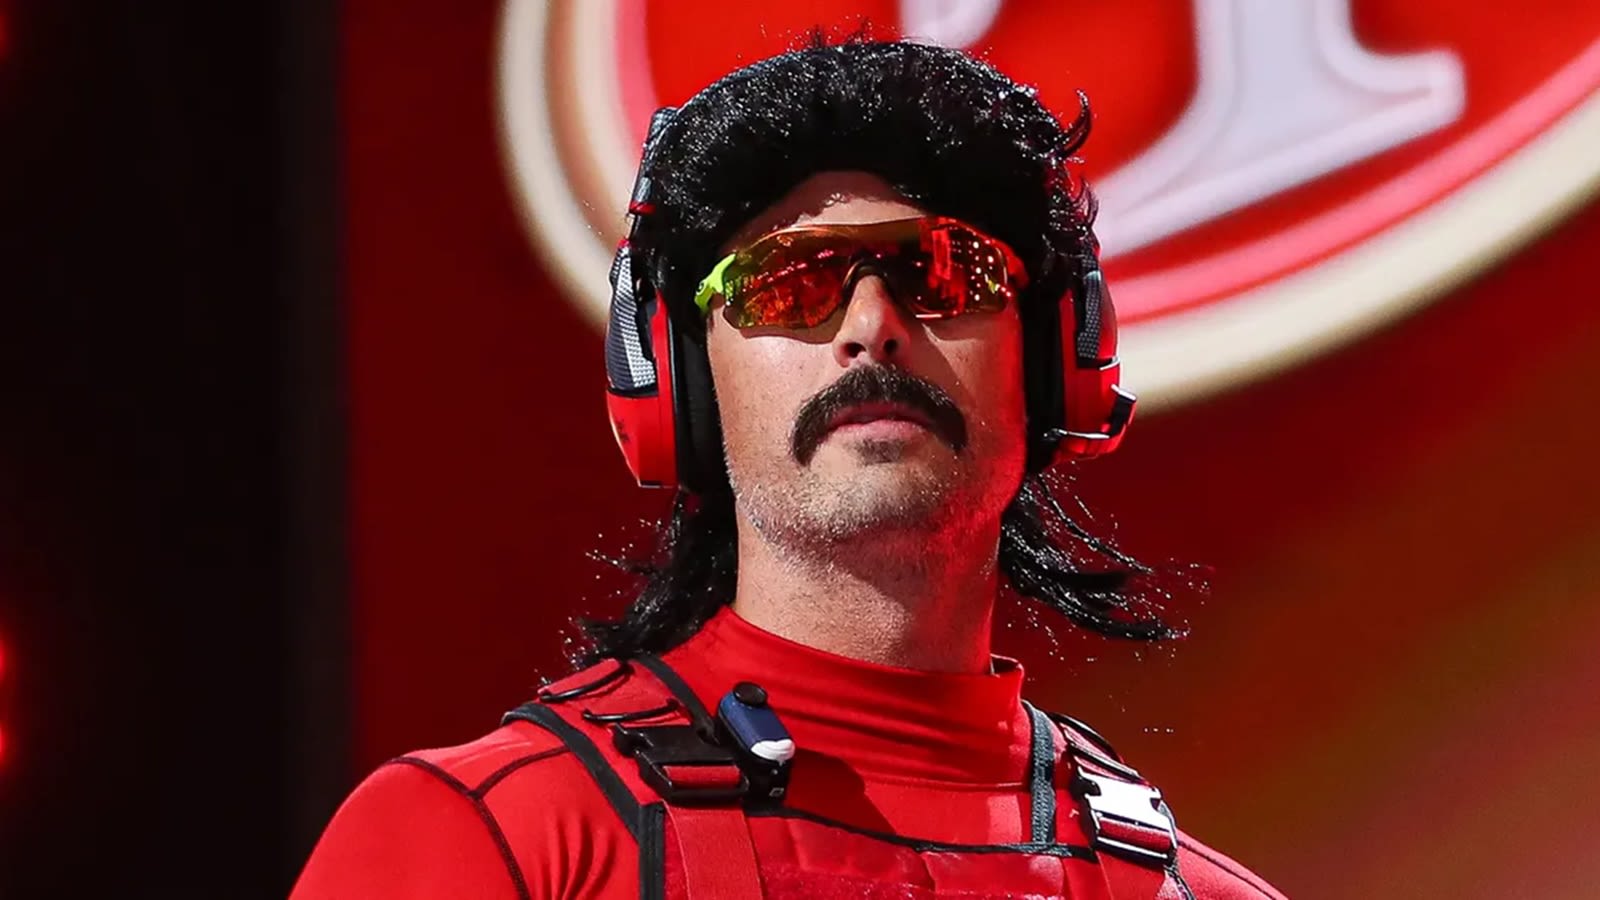 Dr Disrespect's YouTube Channel demonetized following Twitch ban allegations